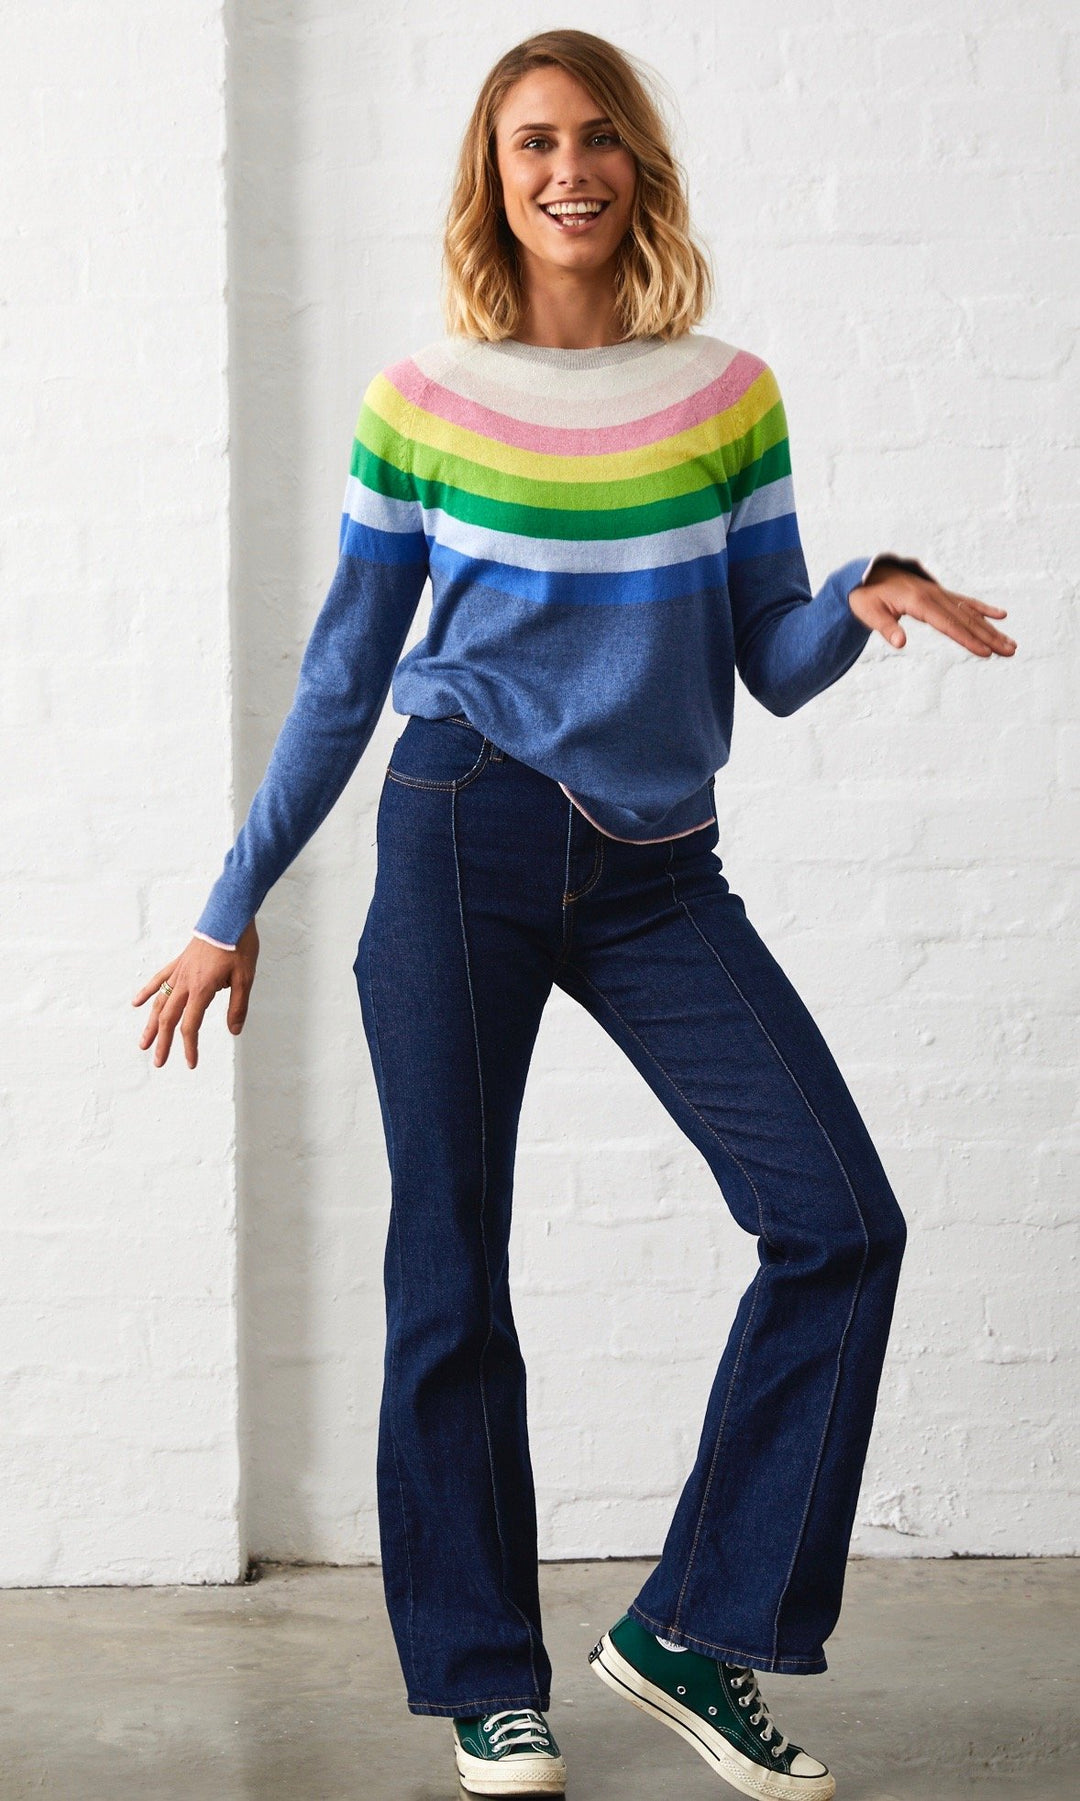 RAINBOW SWEATER - Kingfisher Road - Online Boutique